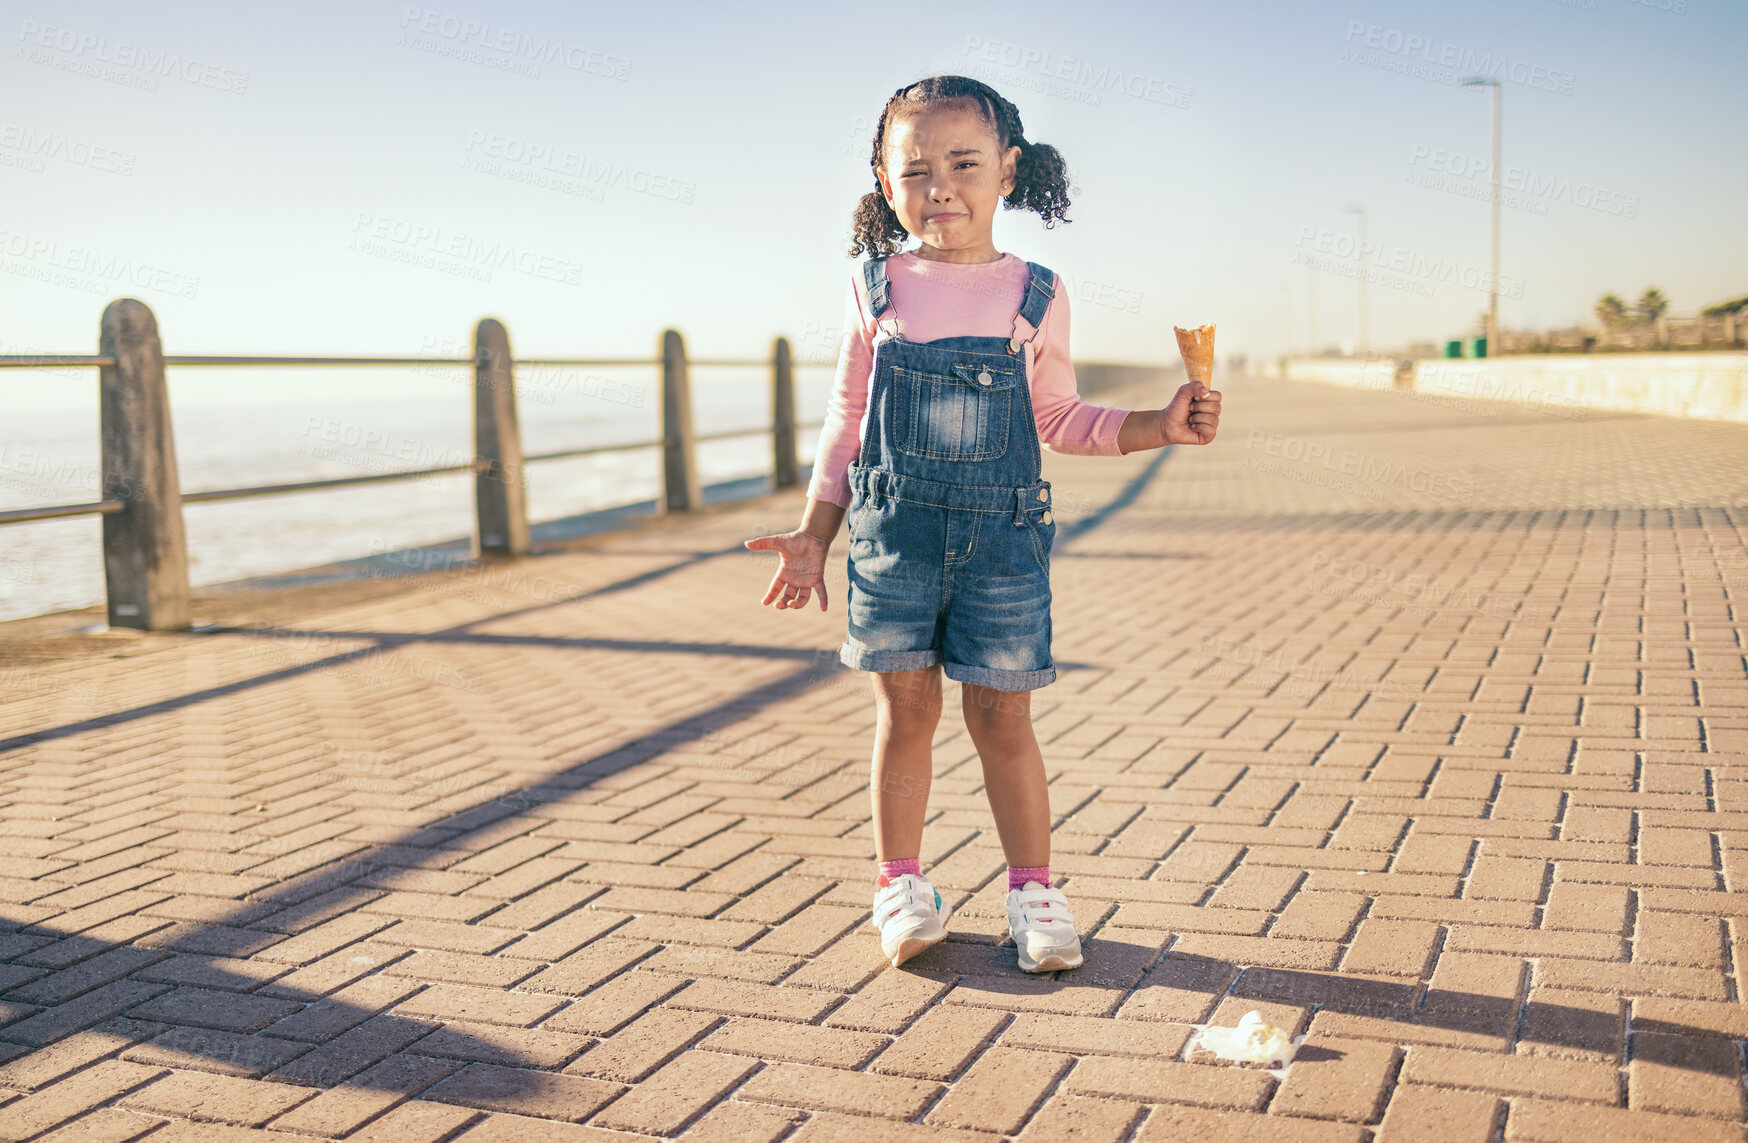 Buy stock photo Upset little girl, ice cream and sad in Cape Town with expression in frustration for a spoilt day by the ocean bay. Unhappy moody child holding empty icecream cone melting mess on floor at sea point